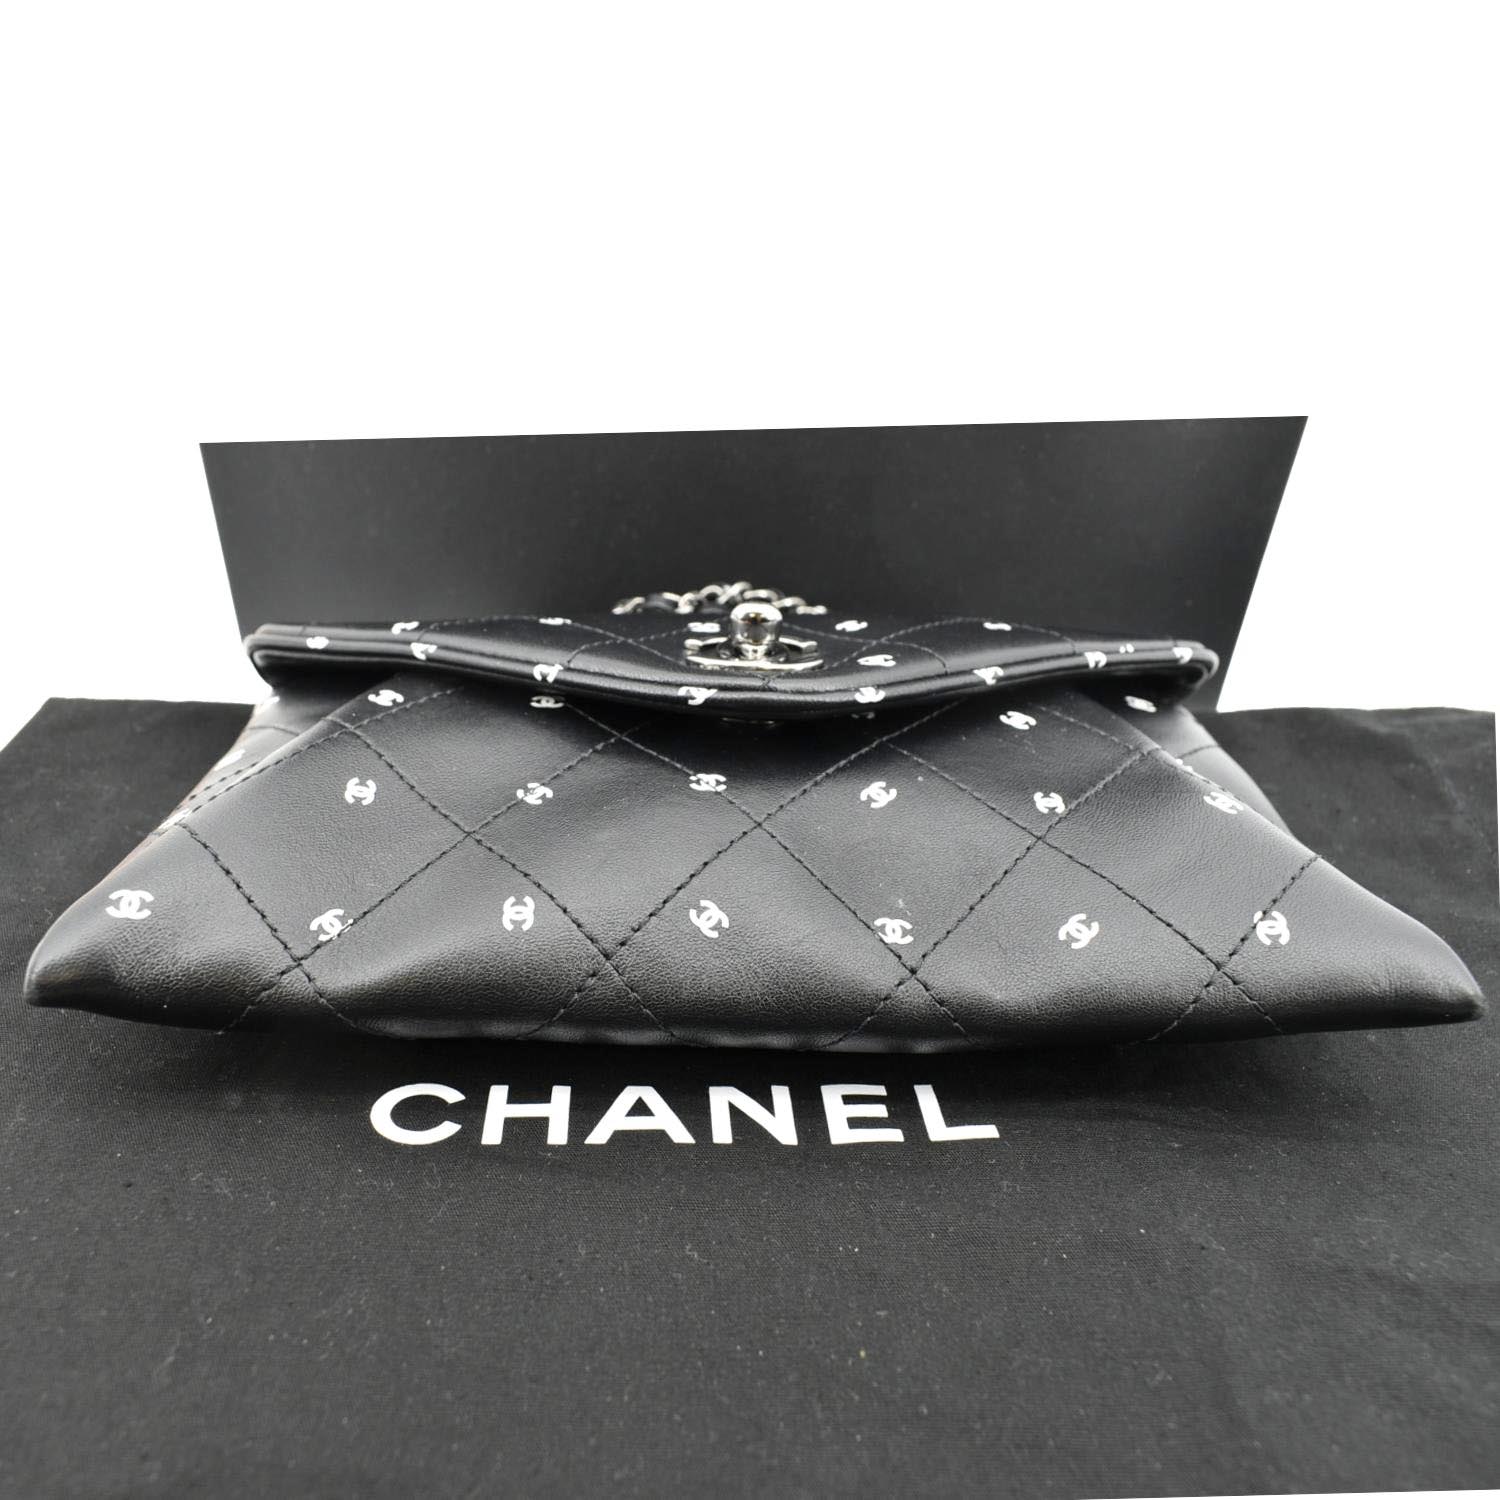 Chanel CC Envelope Printed Lambskin Leather Chain Clutch Bag Black